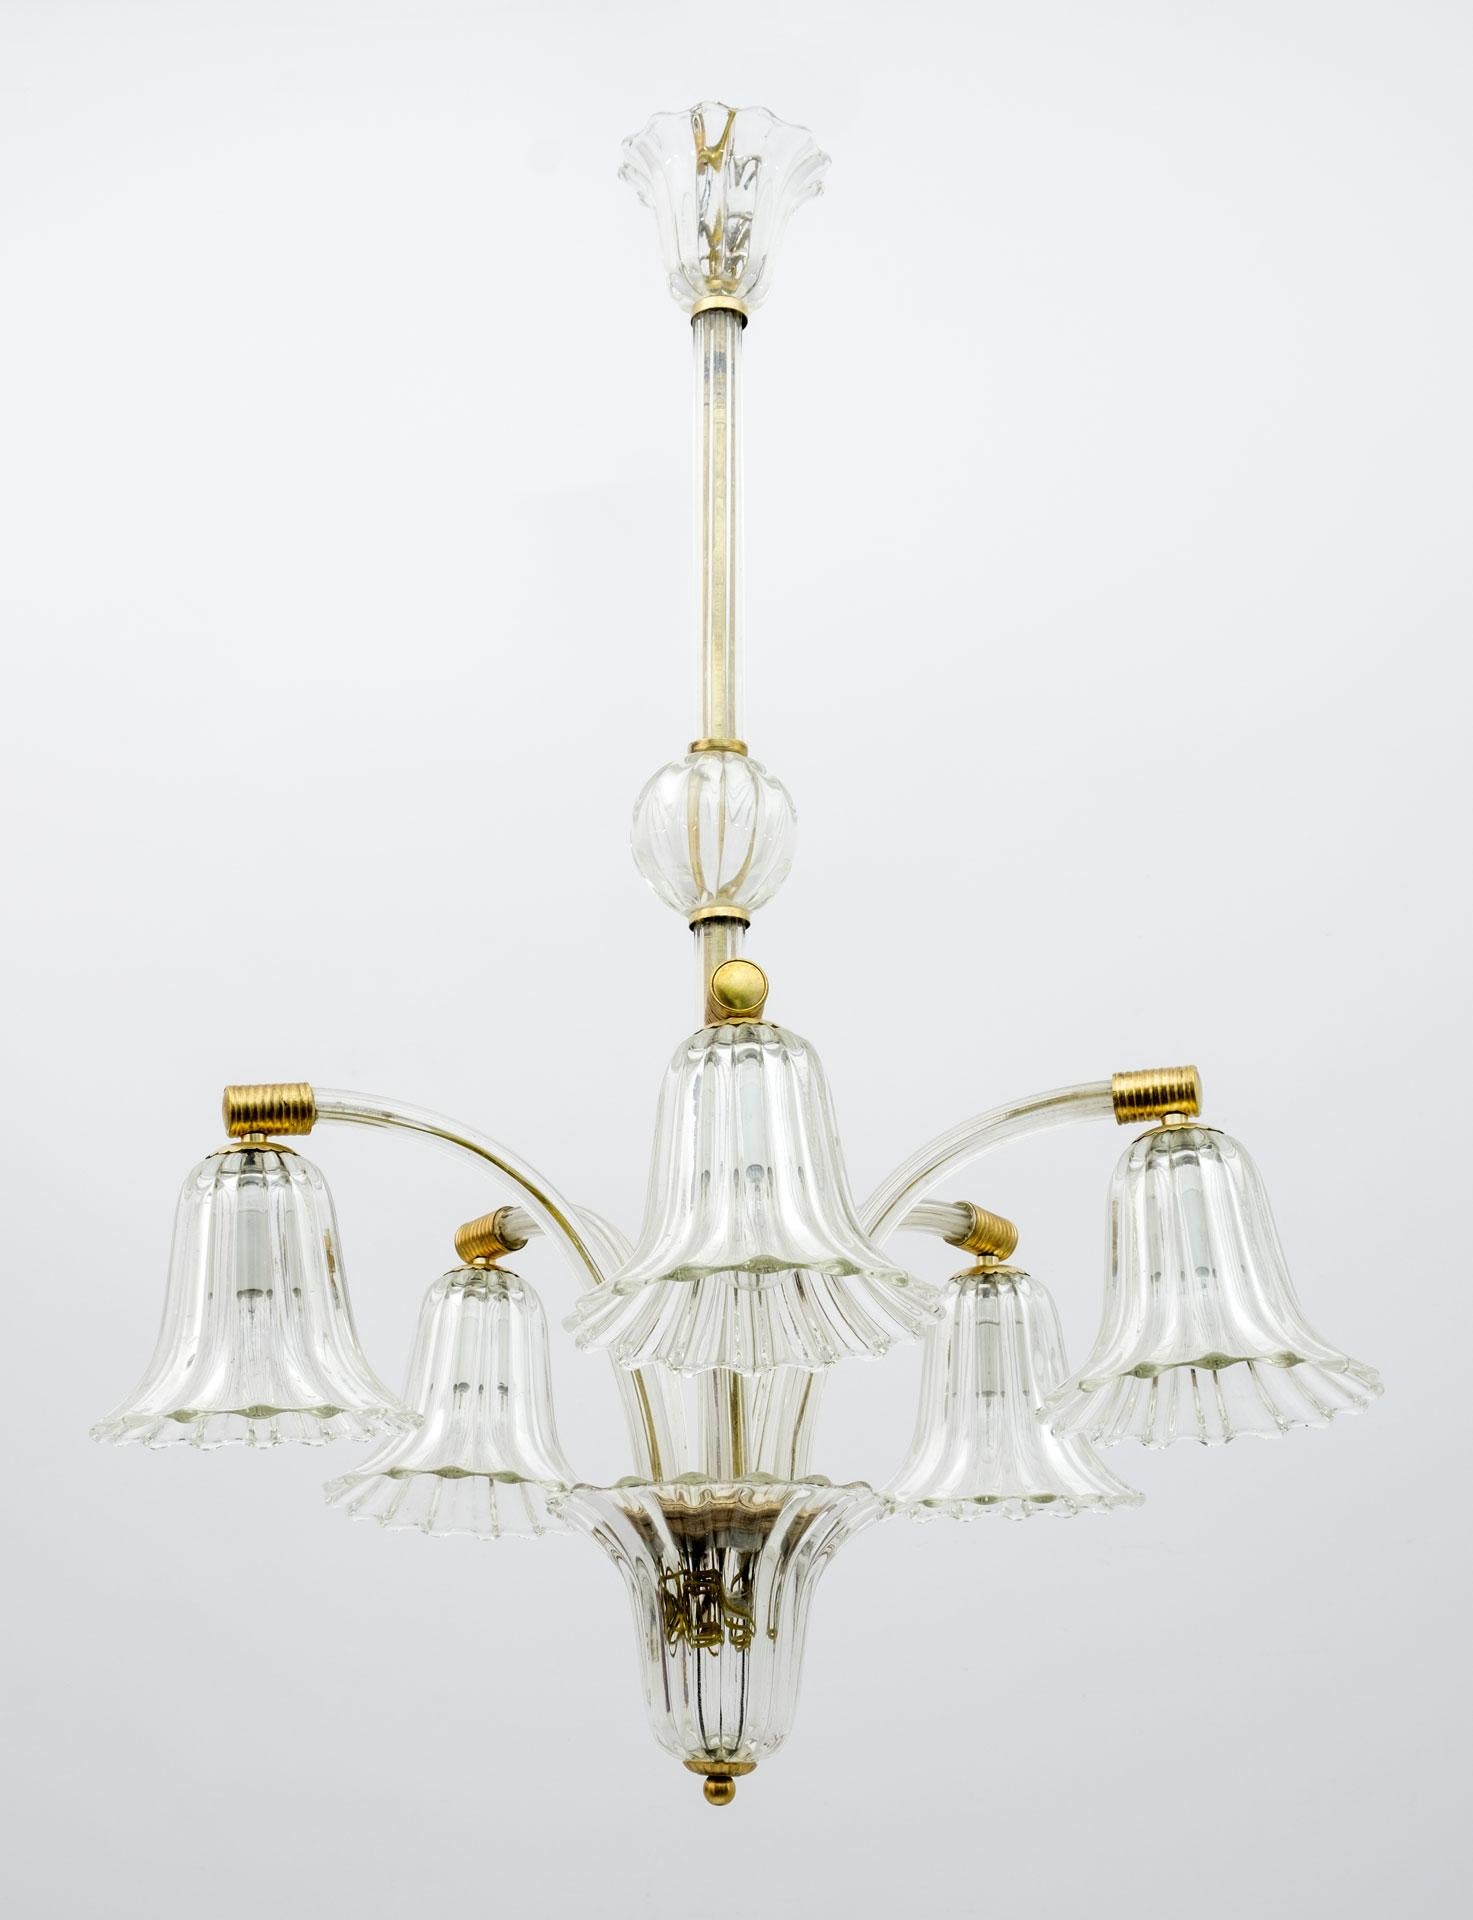 This five-light chandelier was designed and produced by Ercole Barovier in the 1940s, it is made of Murano glass and brass.
Completely cleaned, polished and with a new electrical system, ready to furnish your home.

The Barovier artistic glassworks